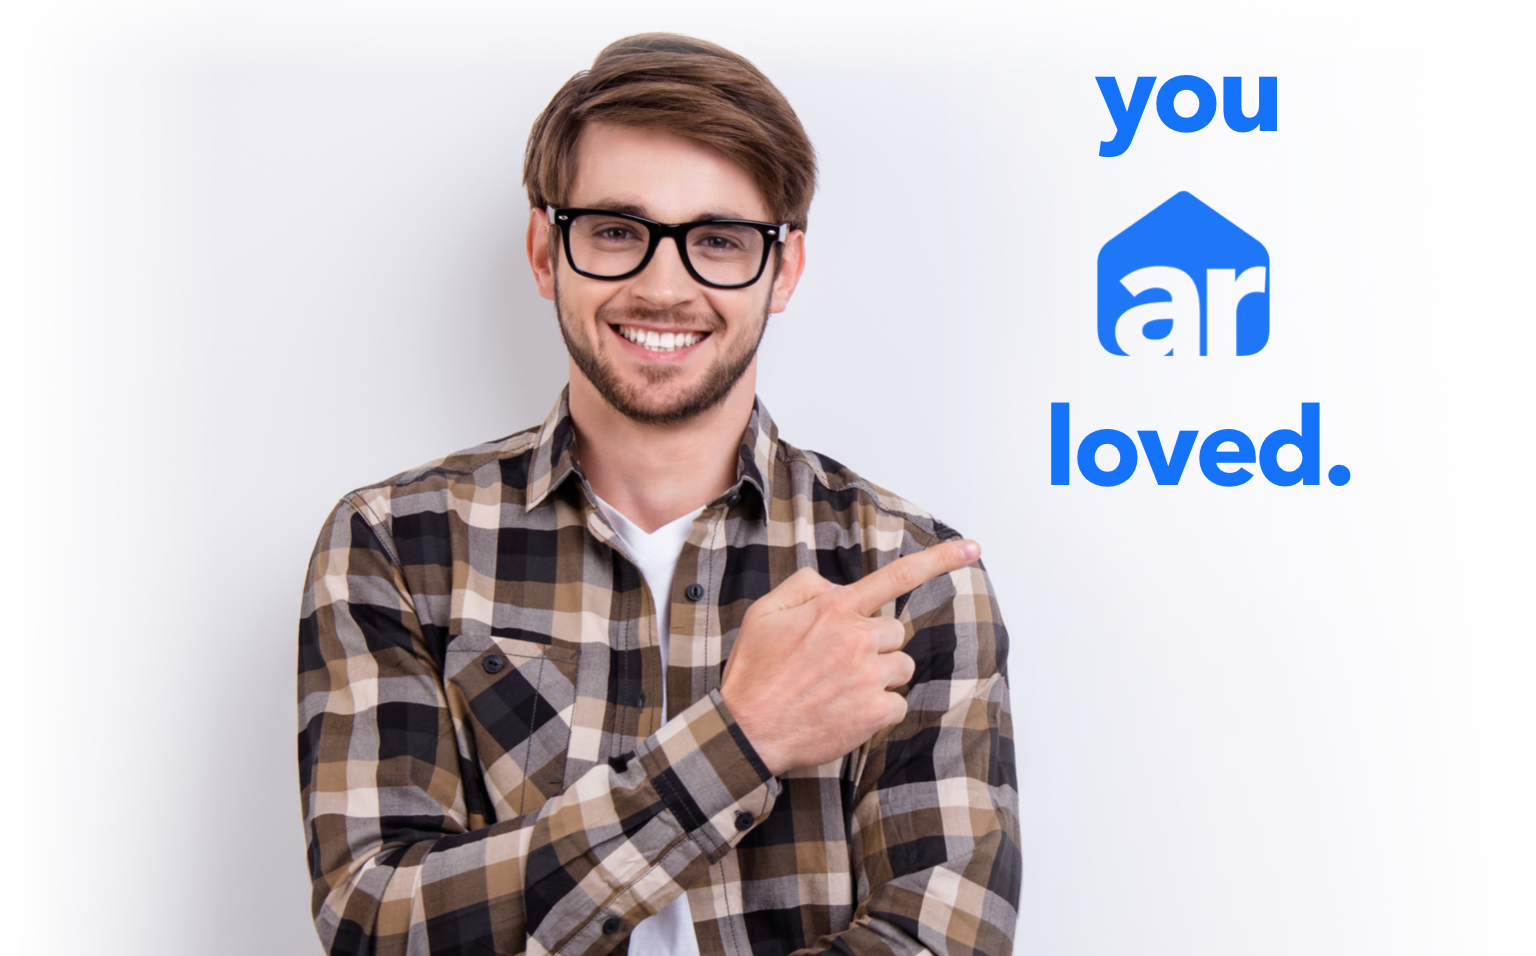 man in glasses and plaid shirt pointing at trademark branding logo 'you ar loved''